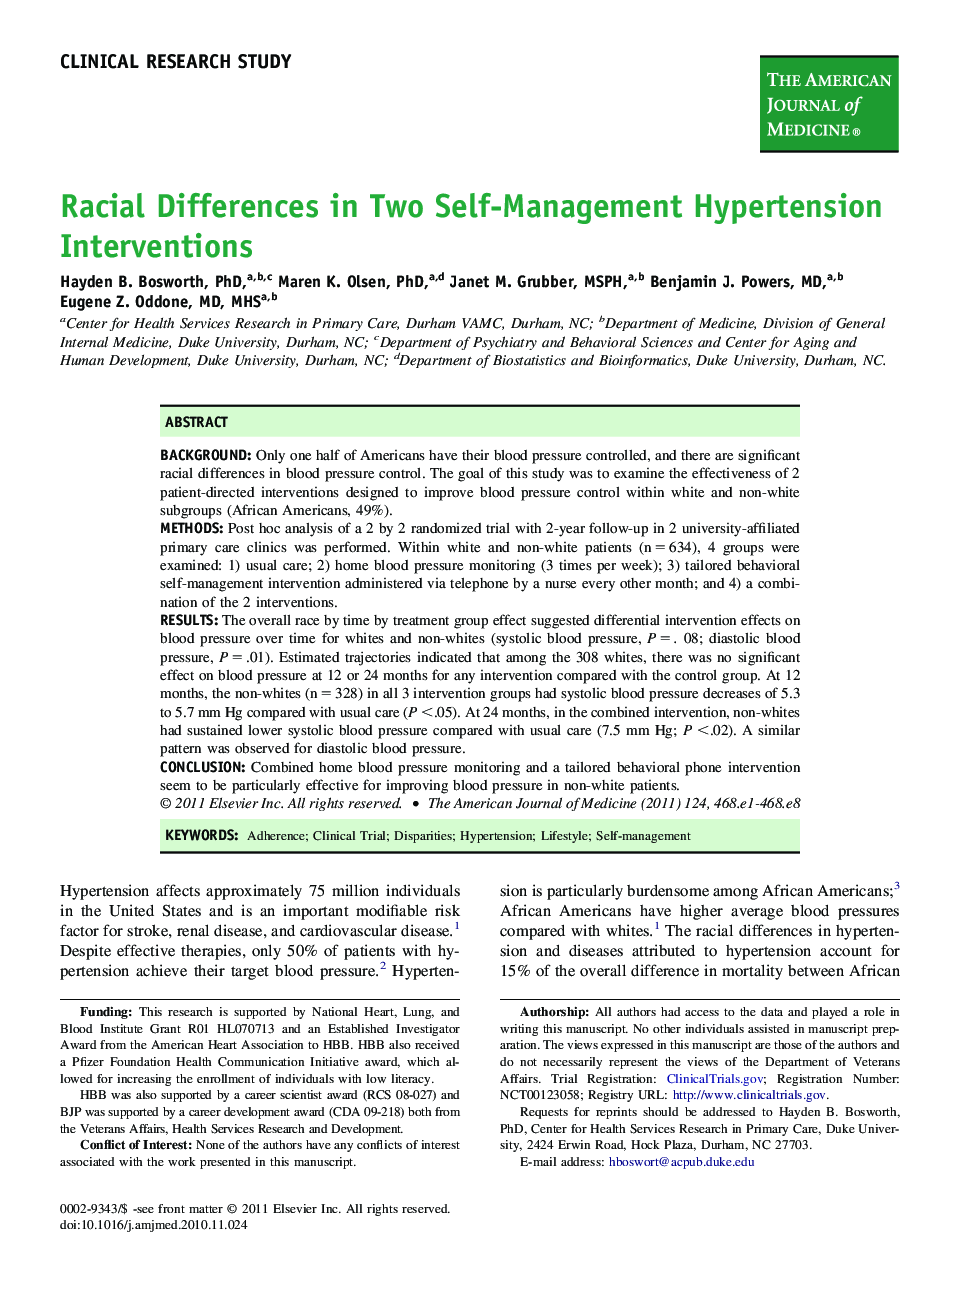 Racial Differences in Two Self-Management Hypertension Interventions